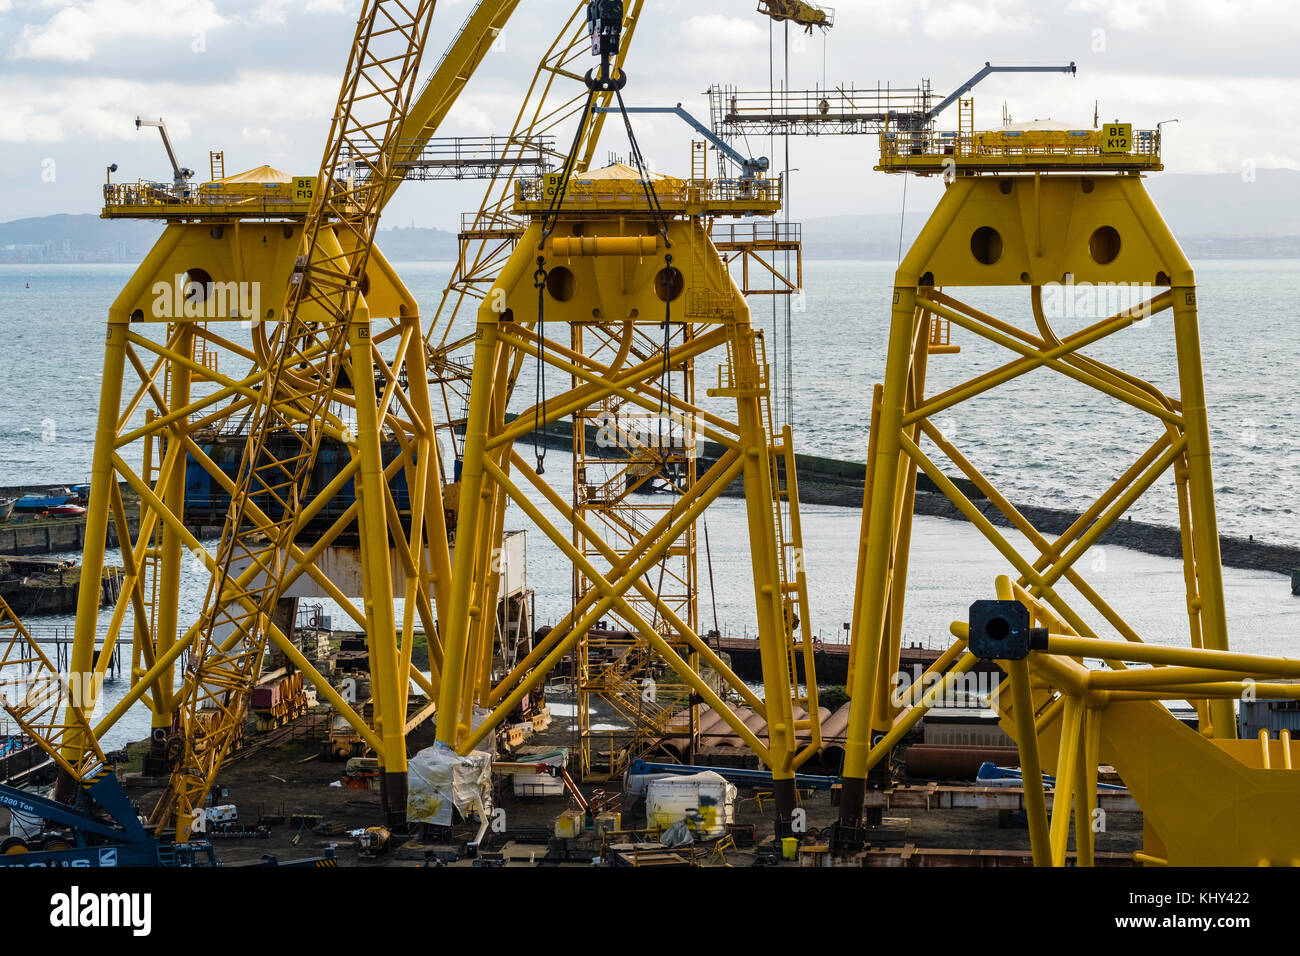 View of Burntisland Fabrications yard at Burntisland in Fife , Scotland, UK. They fabricate platforms and modules for the offshore oil, gas and renewa Stock Photo